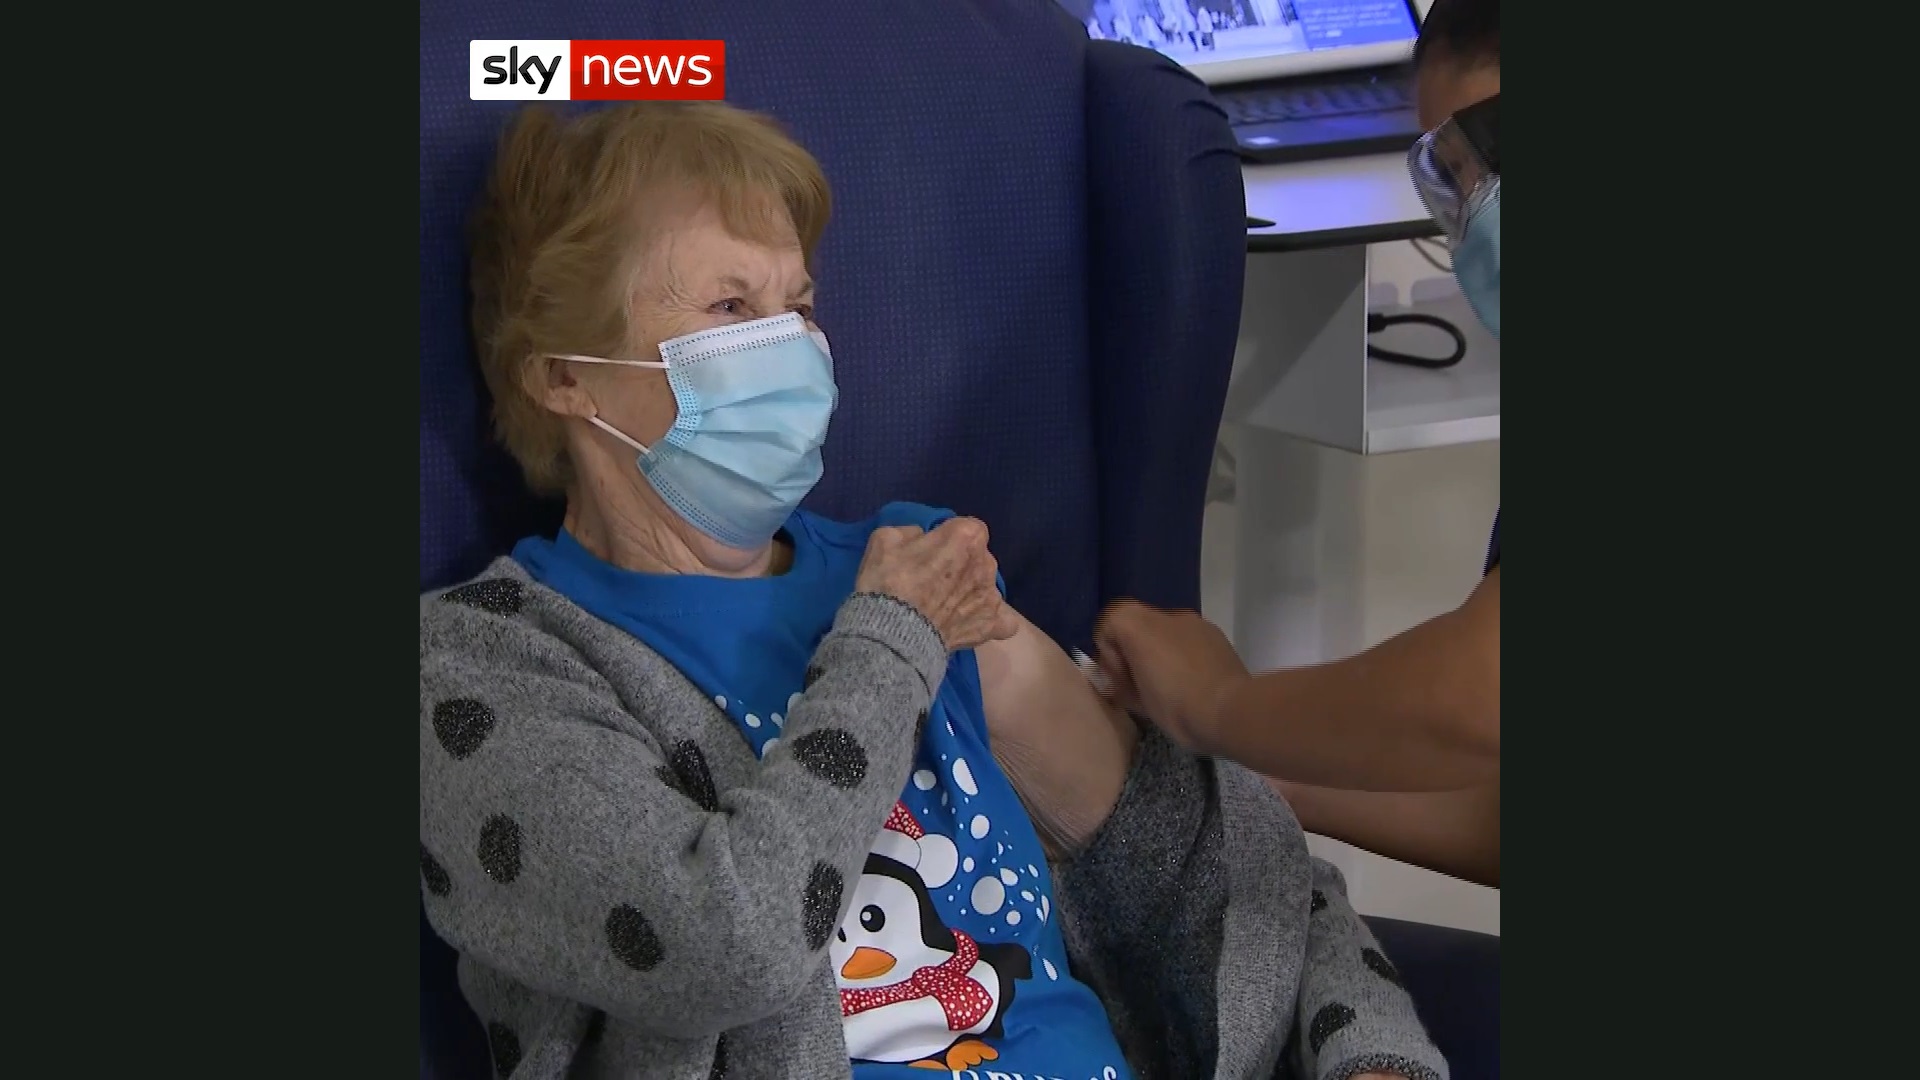 The moment Patient A, Margaret Keenan, becomes the first in world to receive the Pfizer/BioNTech coronavirus jab outside a clinical trial, at University Hospital, Coventry. As shown on Sky News.